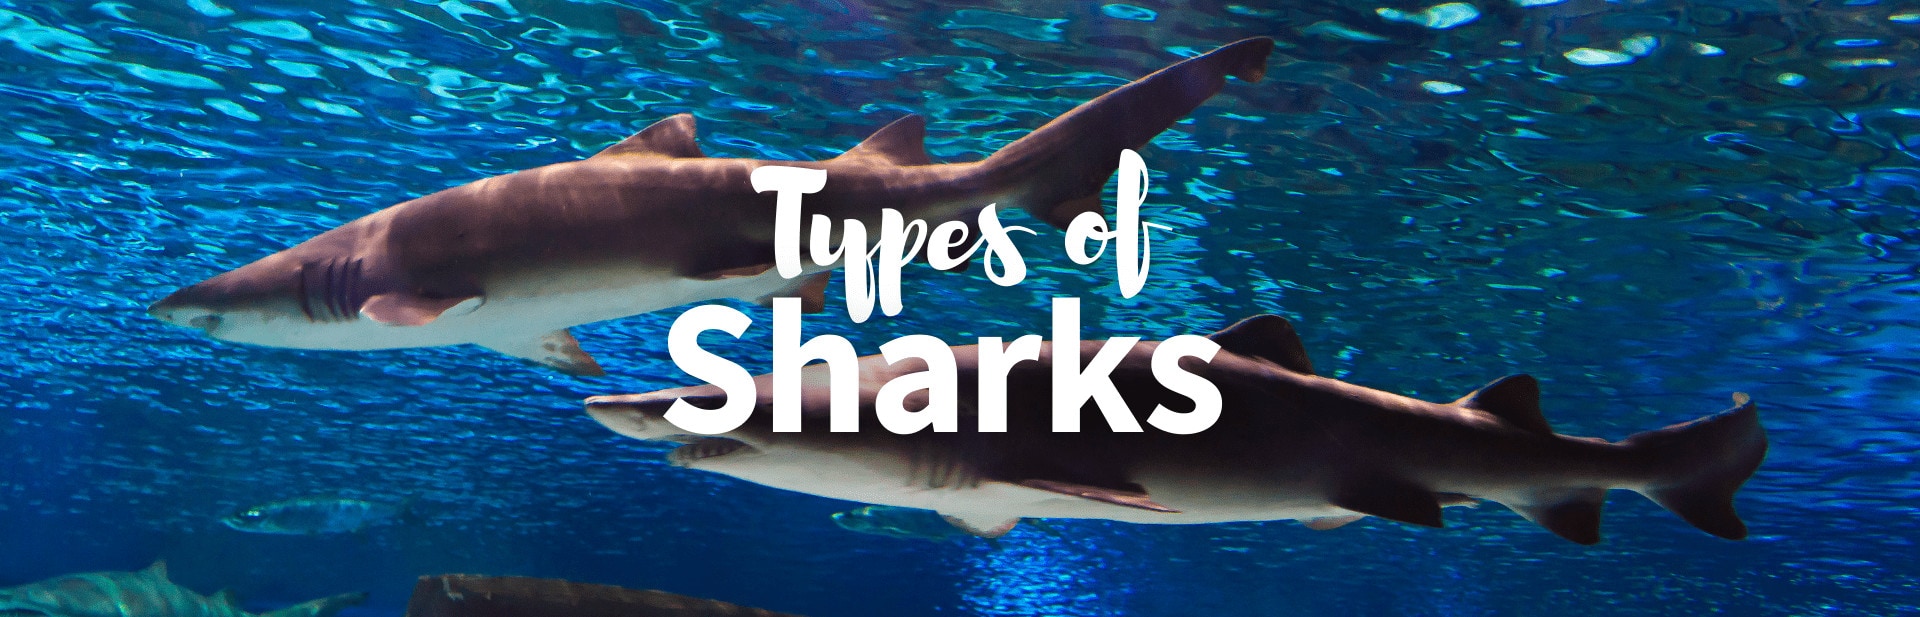 25 Different Types of Sharks (Names, Pictures & More!)